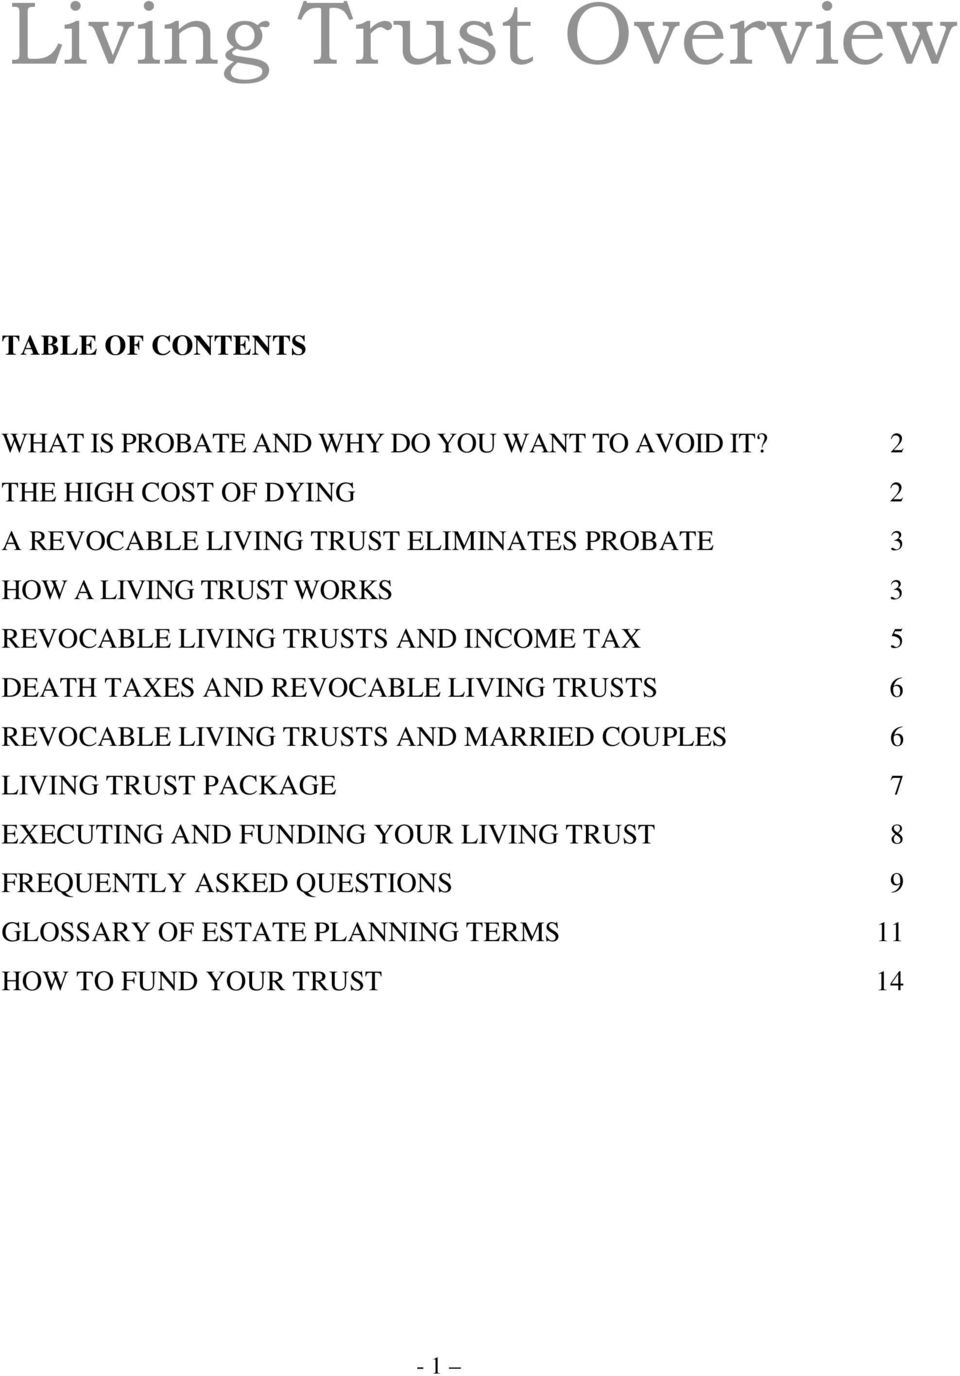 TRUSTS AND INCOME TAX 5 DEATH TAXES AND REVOCABLE LIVING TRUSTS 6 REVOCABLE LIVING TRUSTS AND MARRIED COUPLES 6 LIVING